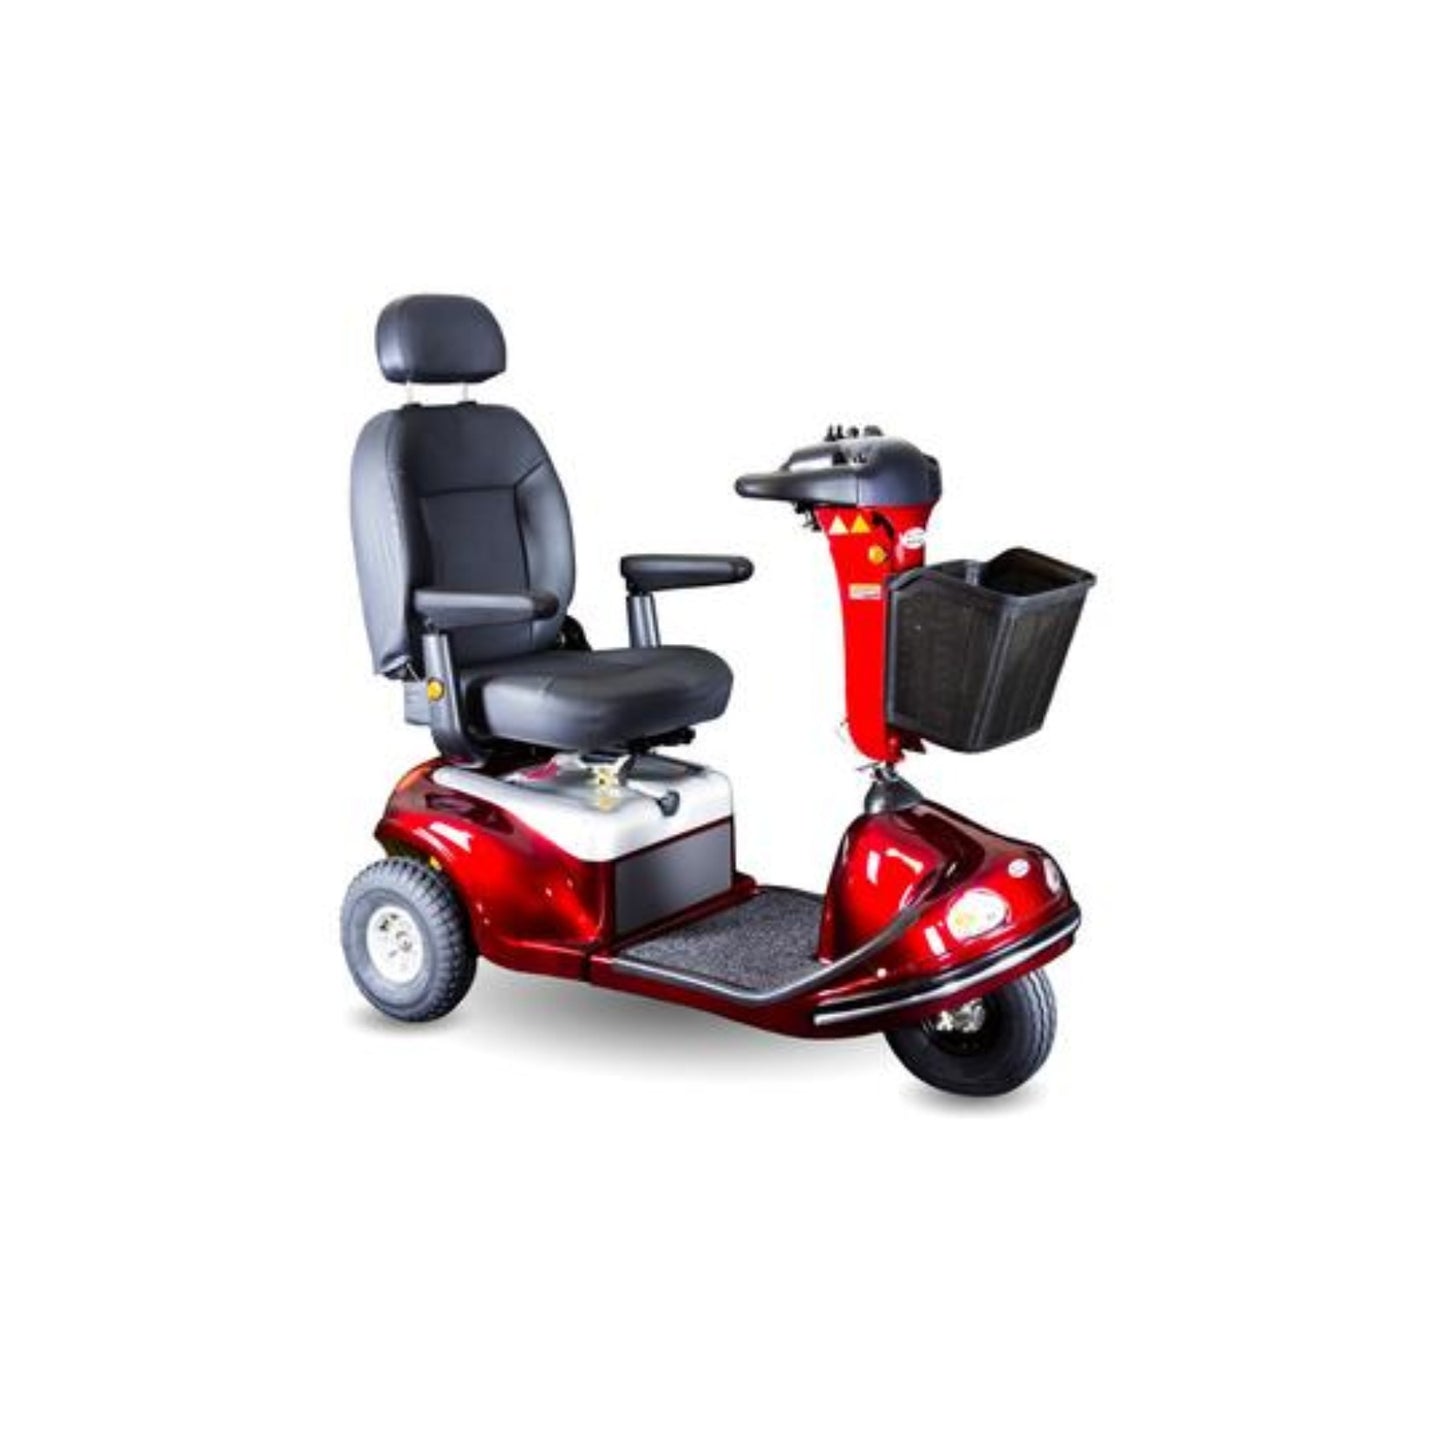 Shoprider Enduro XL3 Heavy Duty 3-Wheel Long Distance Mobility Scooter - Swivel Chair, Full Suspension For Max Comfort, 500lbs Weight Capacity, For Seniors